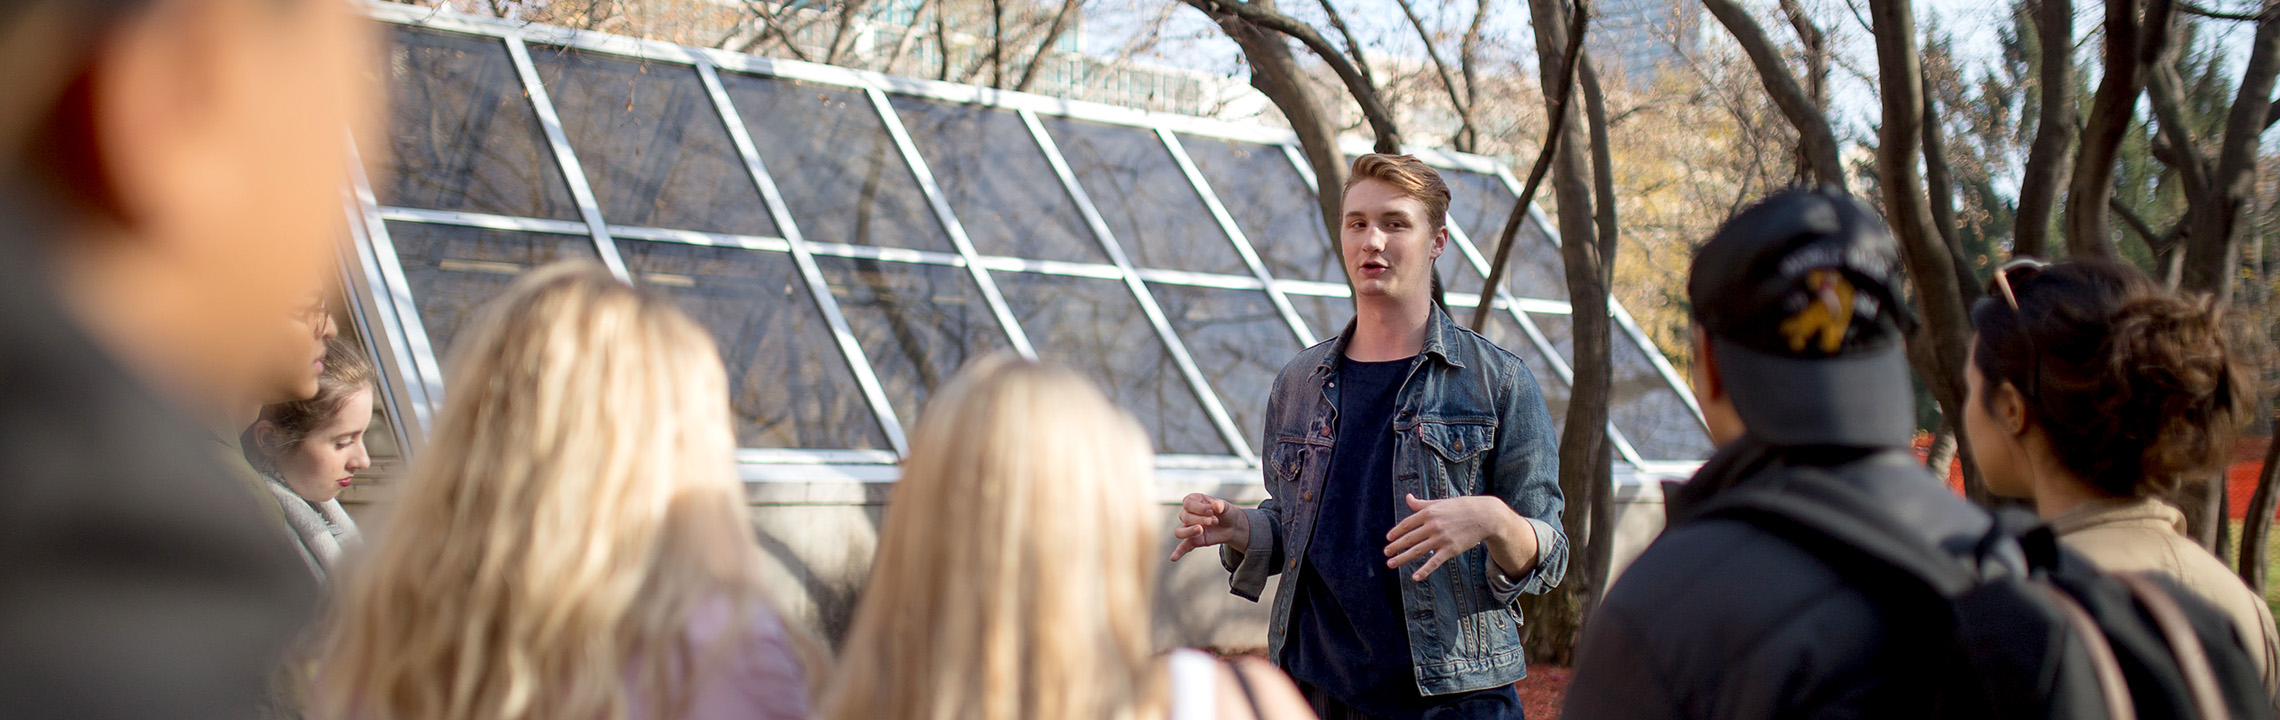 A student tour guide speaking at the Quad to guests touring the TMU campus.